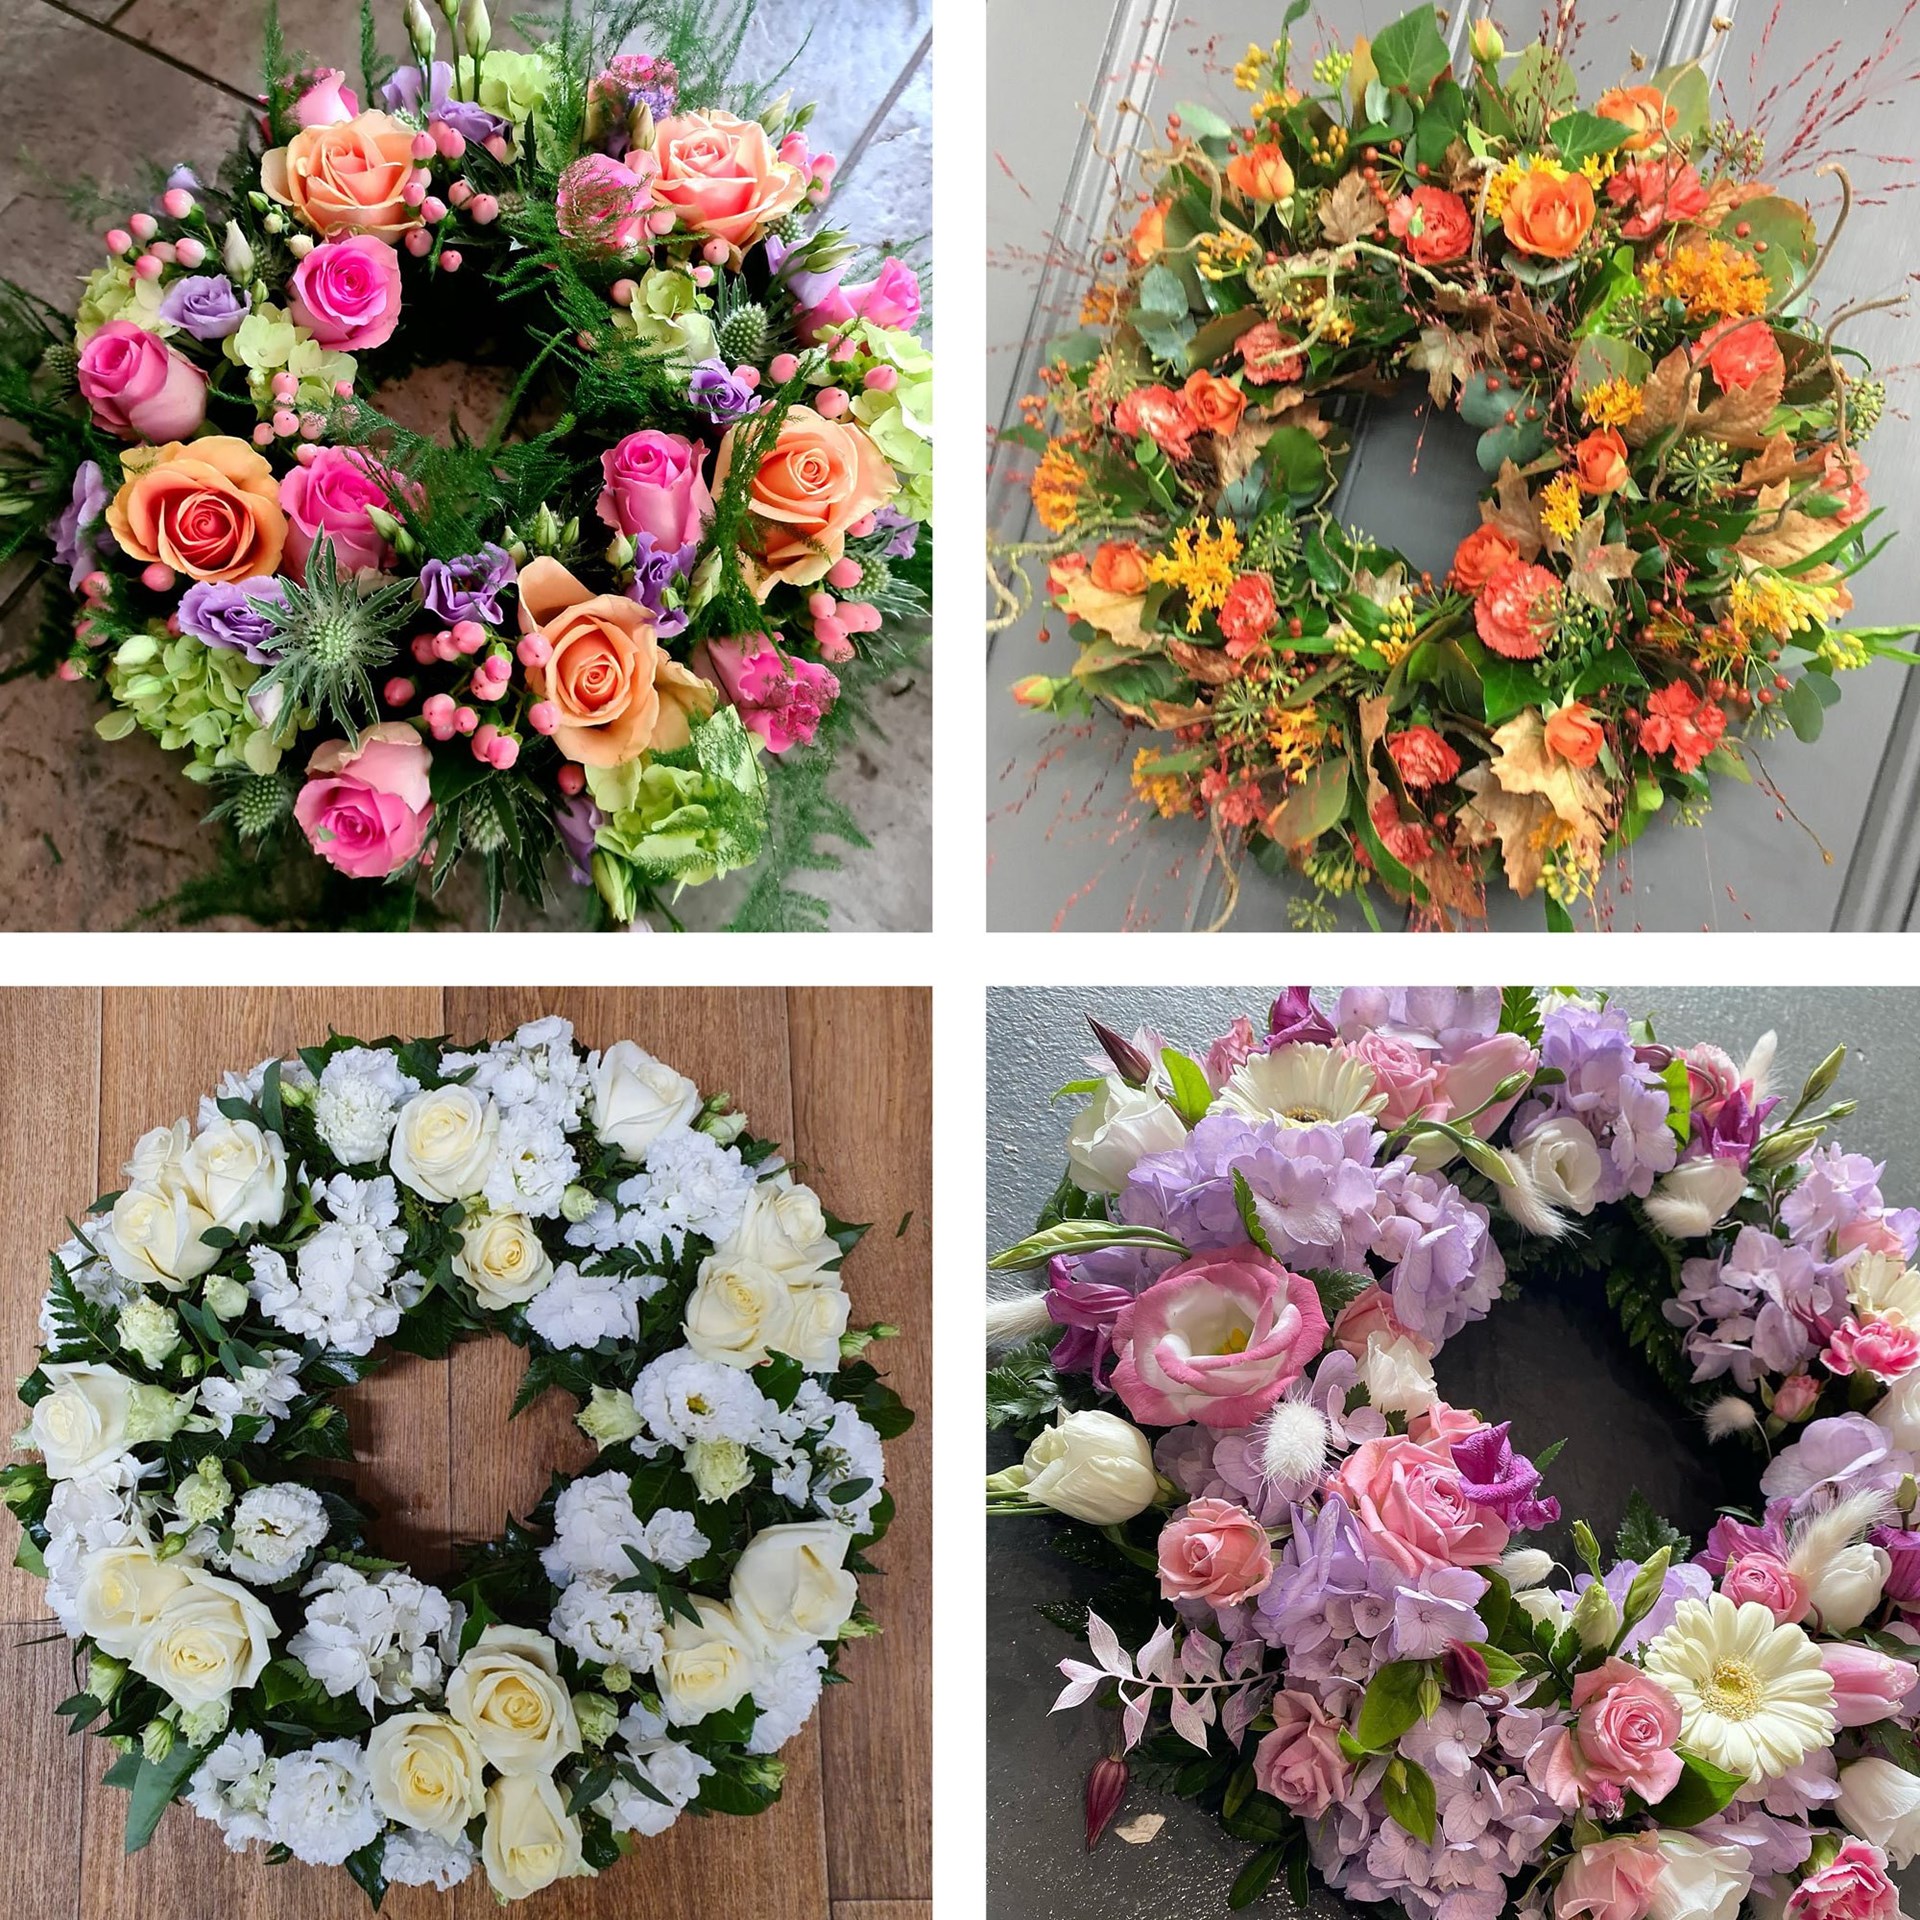 product image for Funeral Wreath